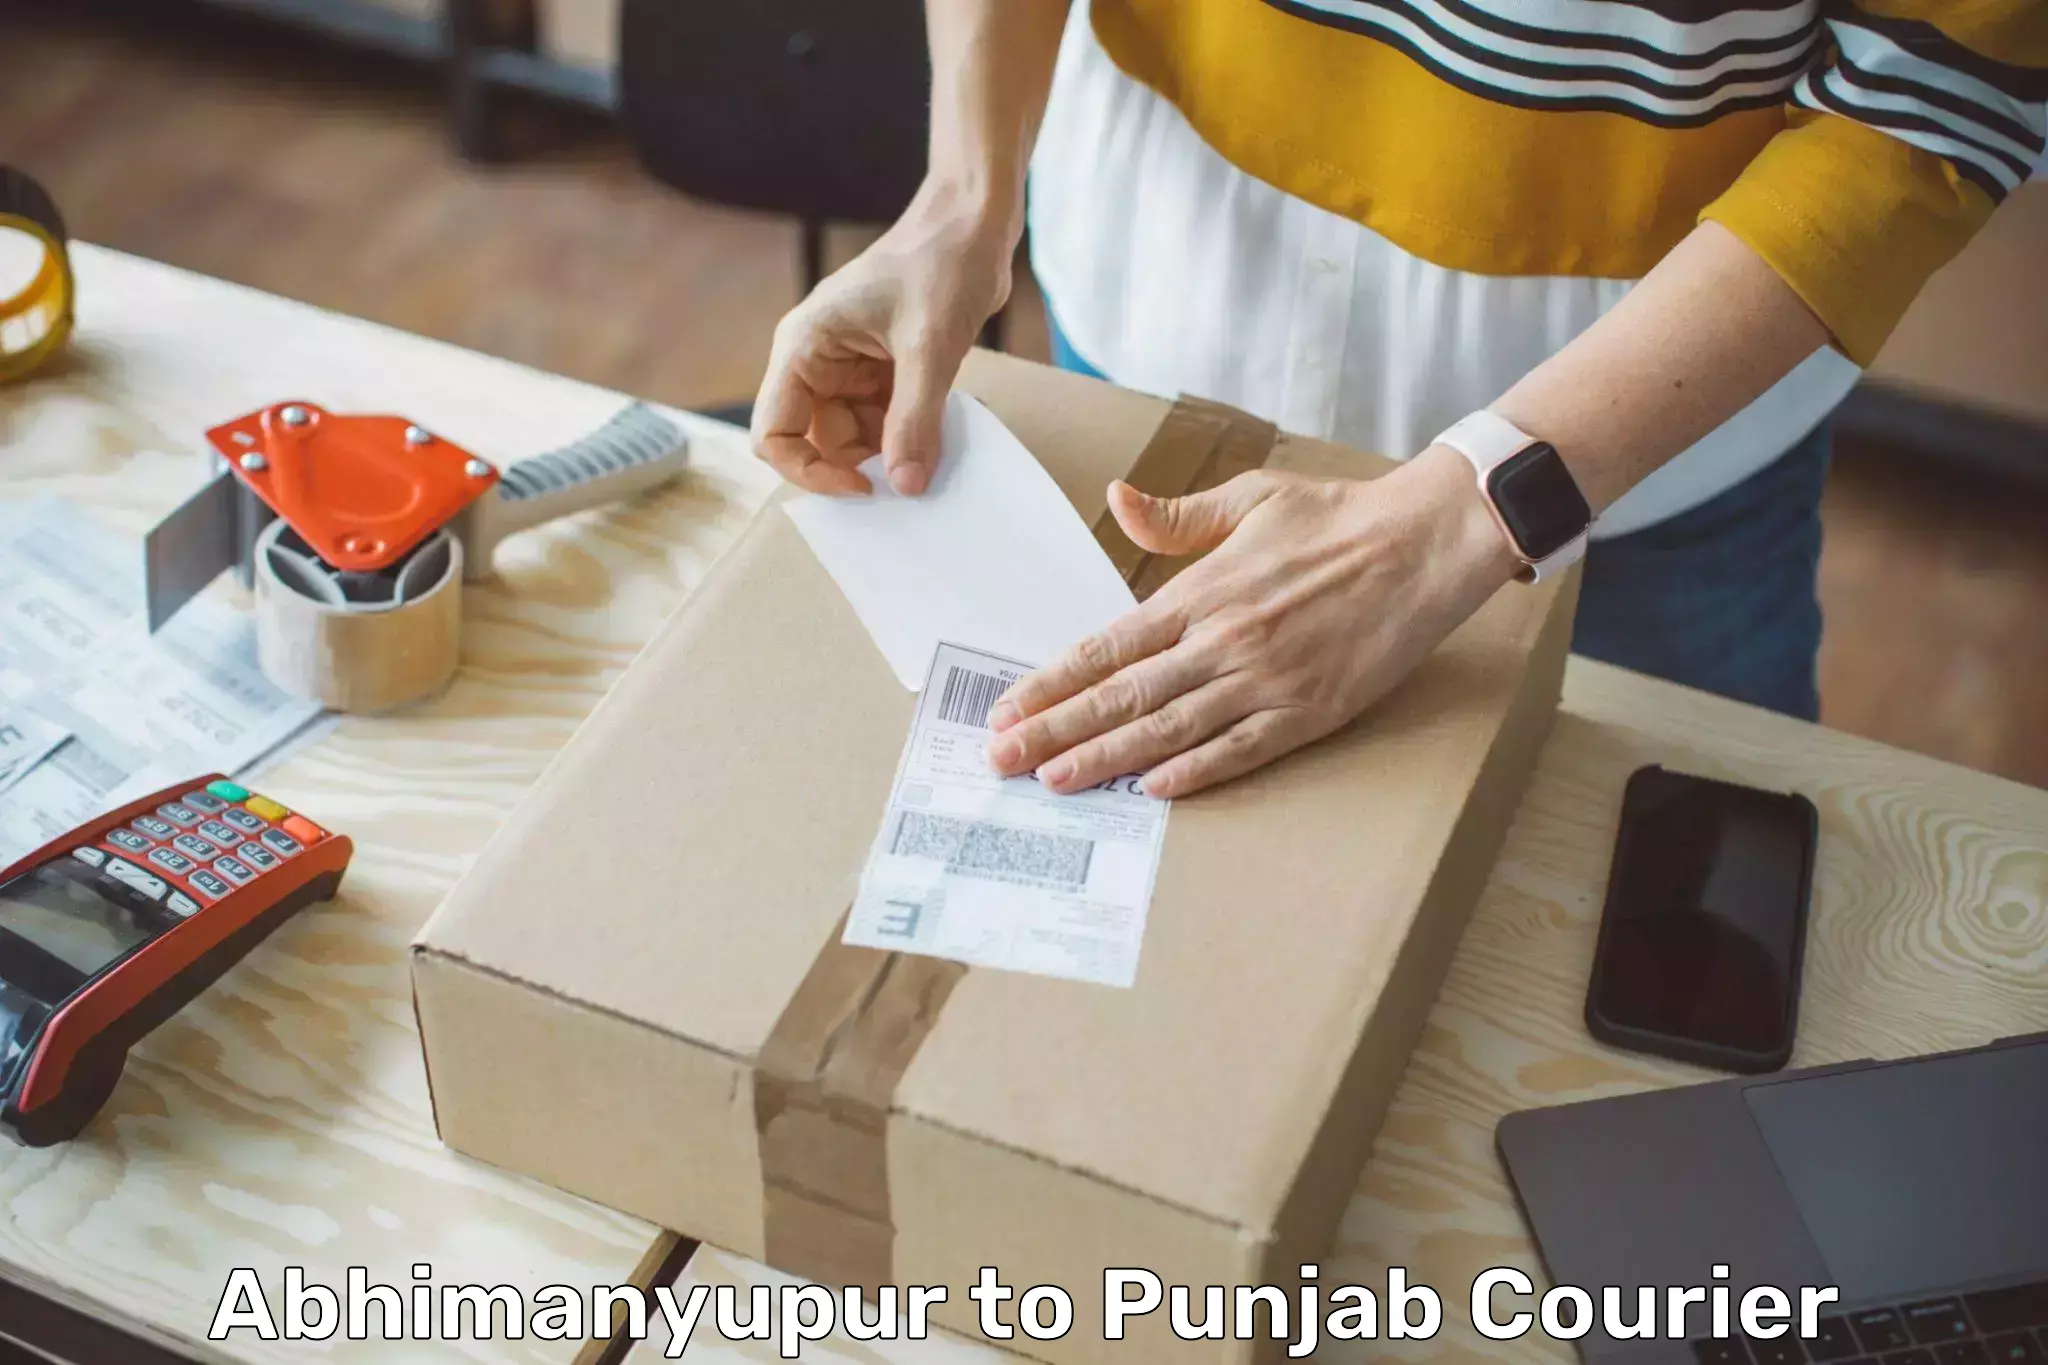 High-capacity parcel service Abhimanyupur to Pathankot